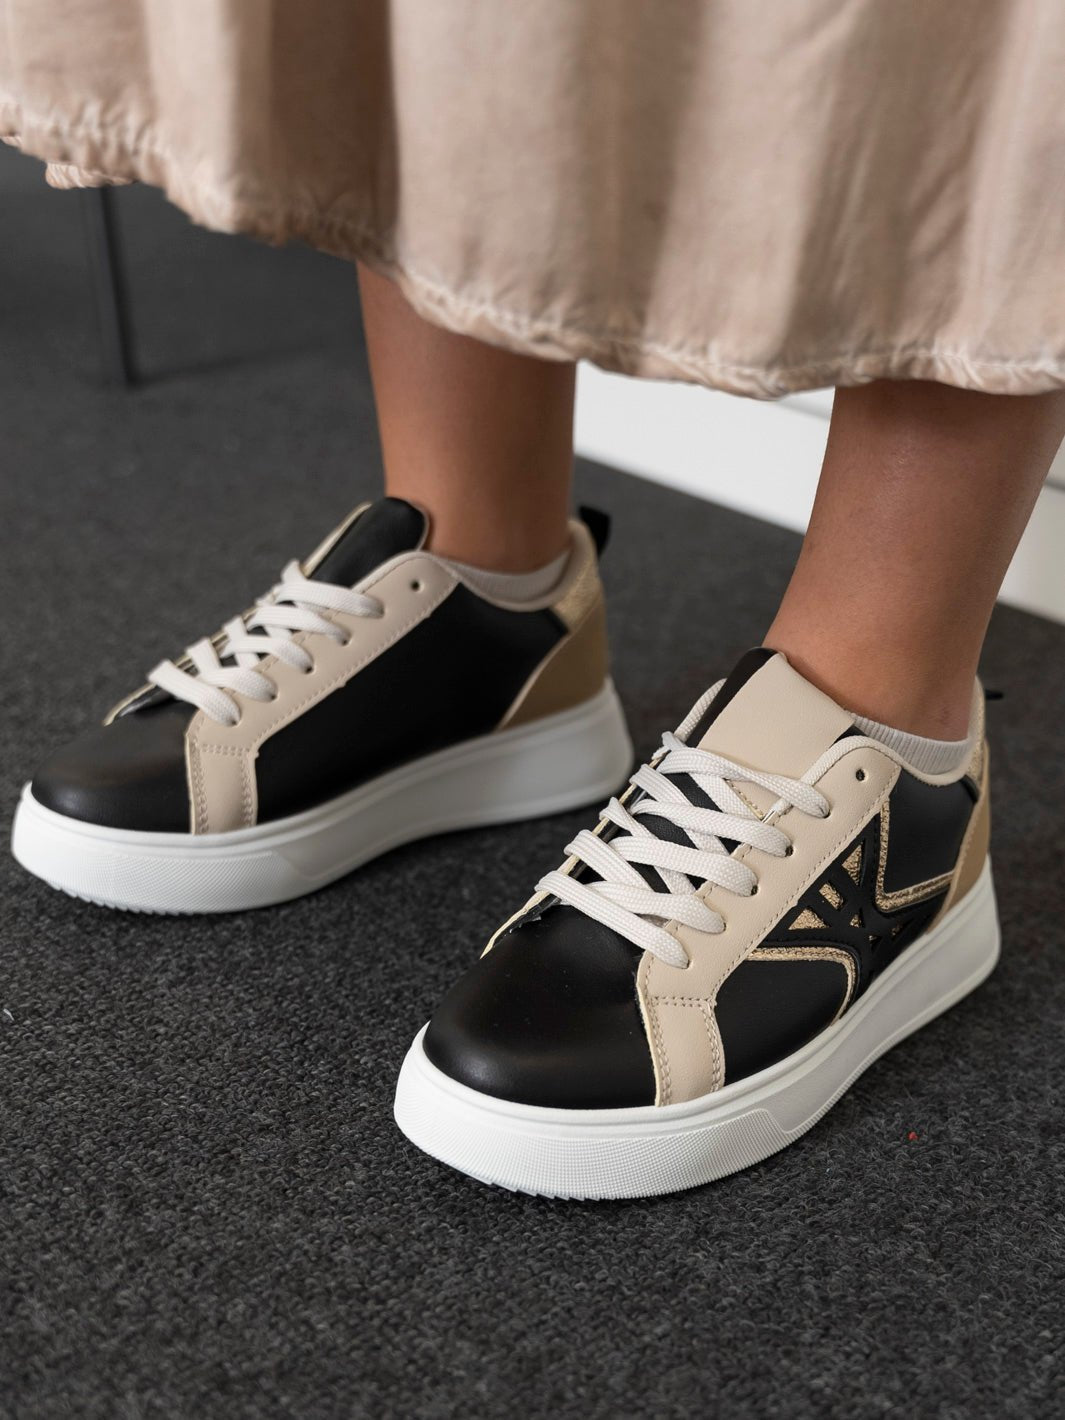 Annie sneakers white/black - Online-Mode